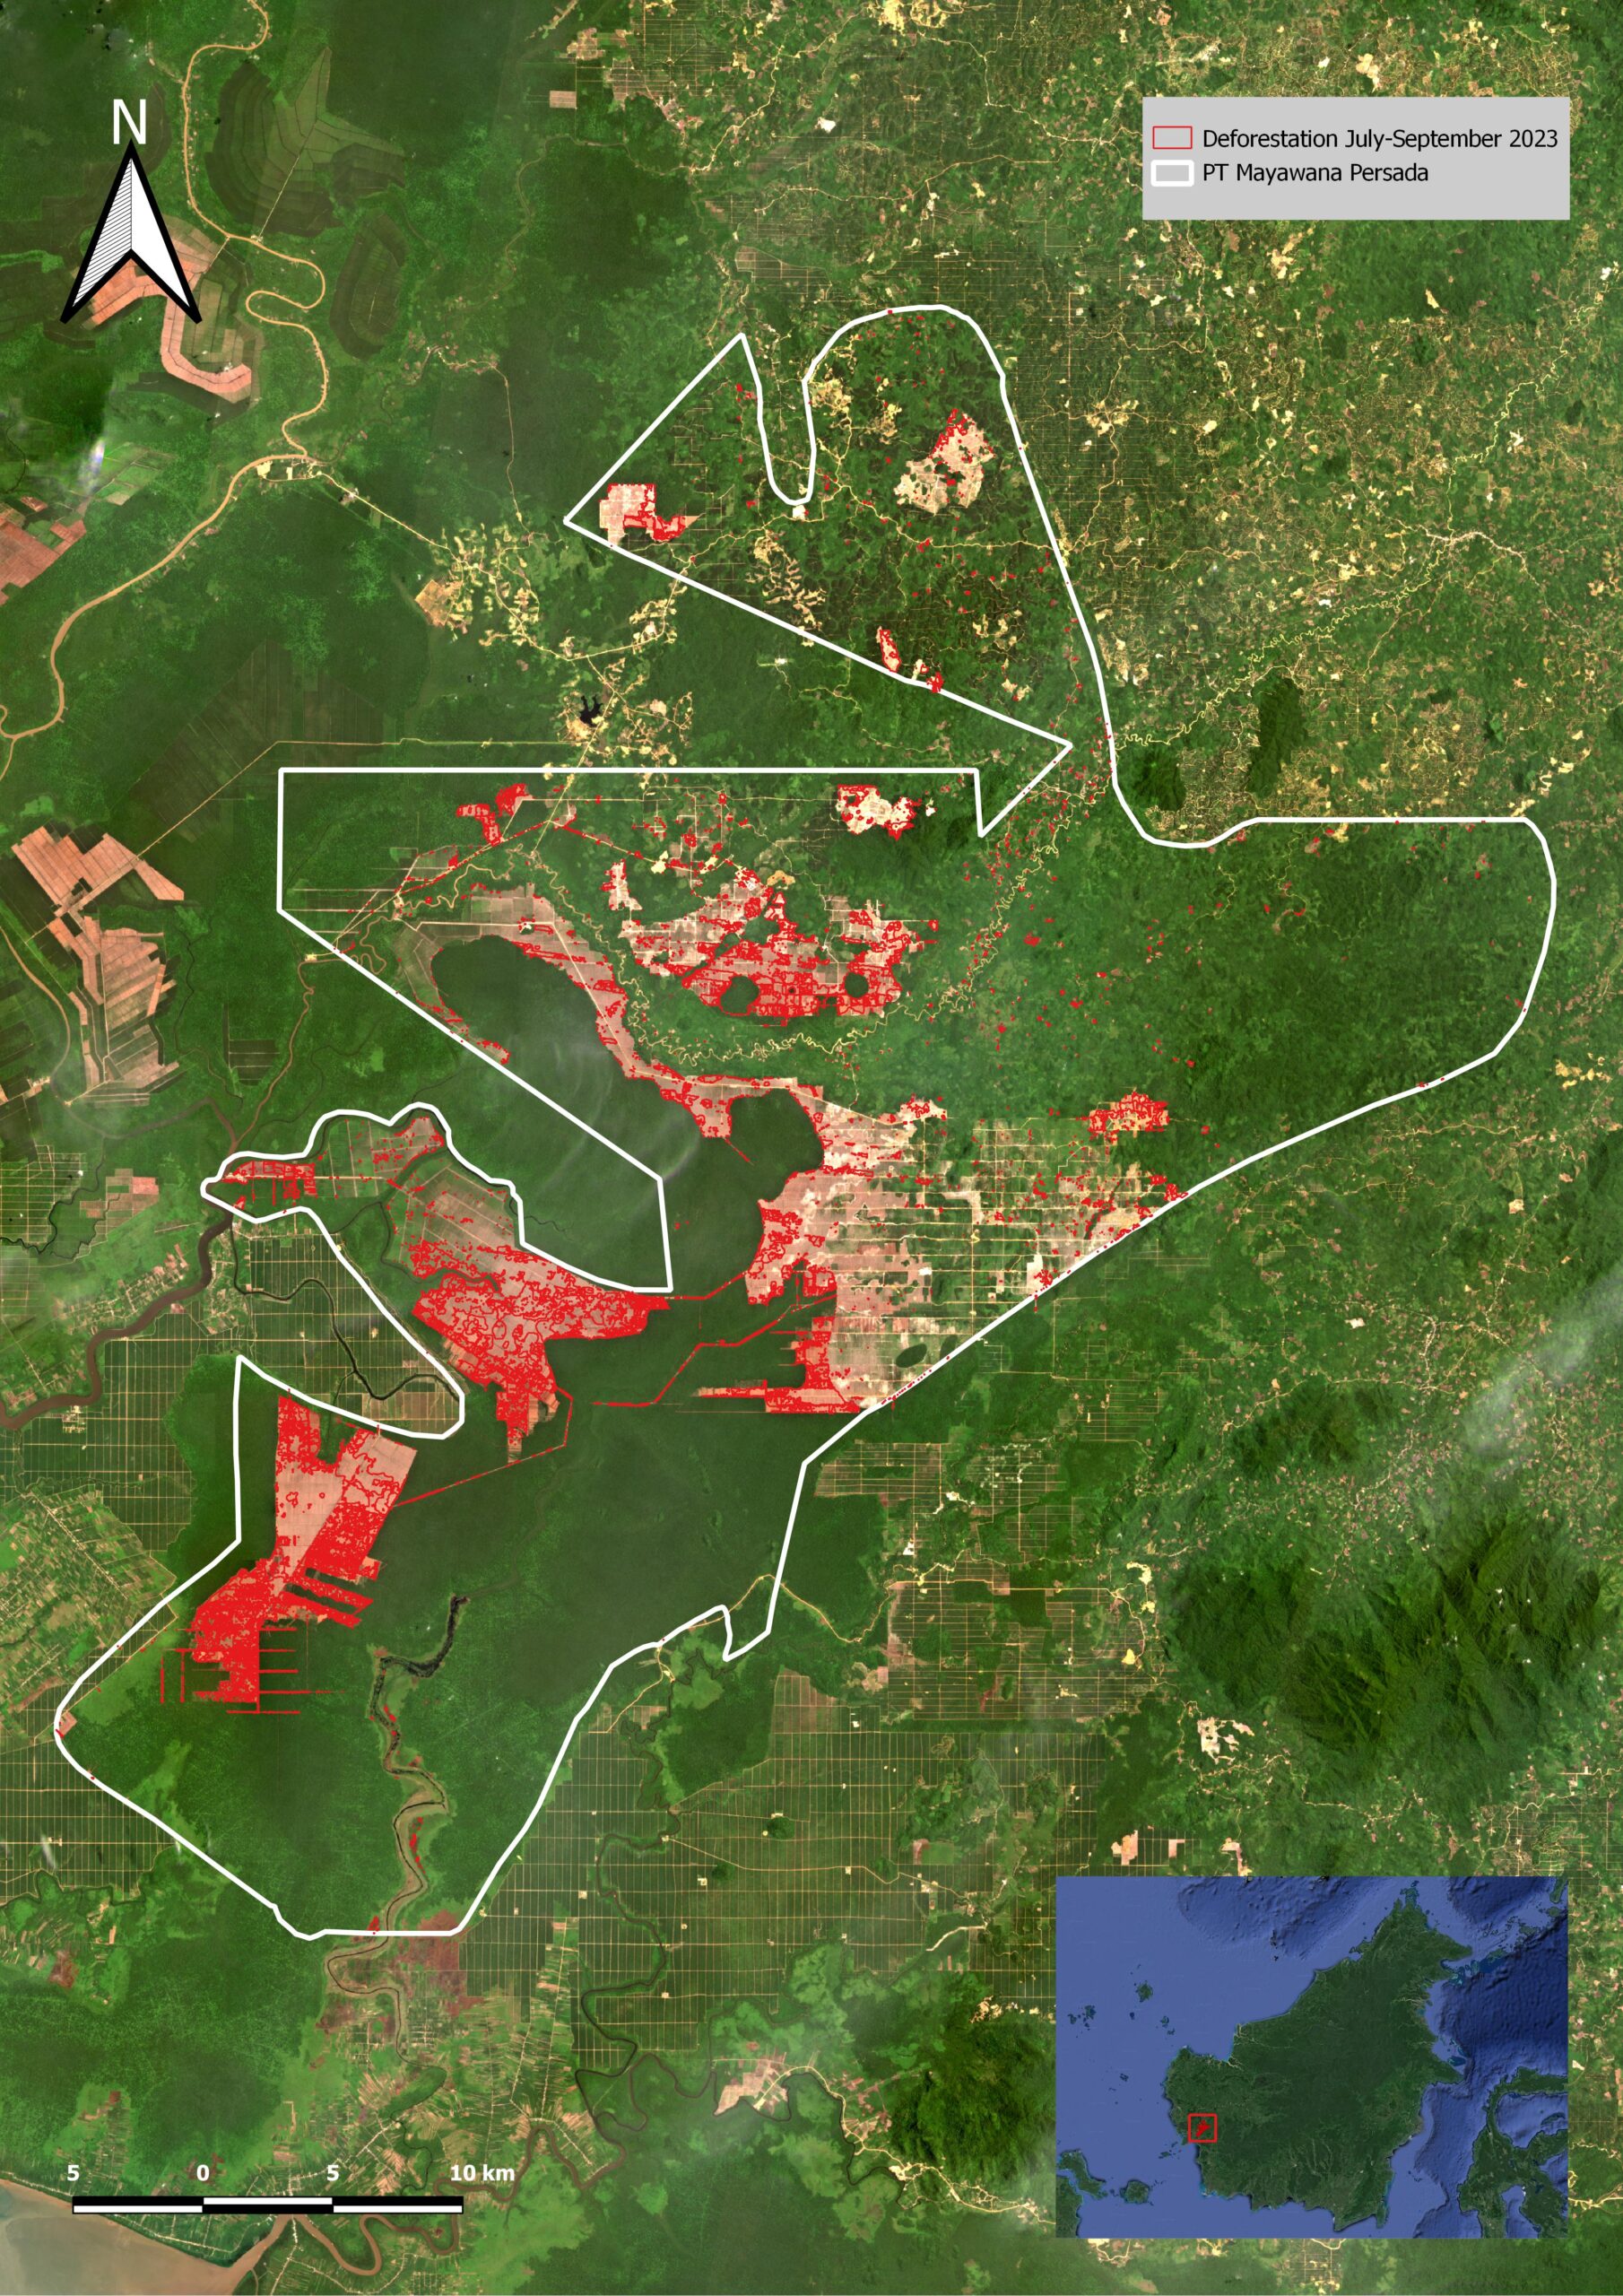 Deforestation within Mayawana Persada’s concession in West Kalimantan from July to September 2023. Image courtesy of Aidenvironment.